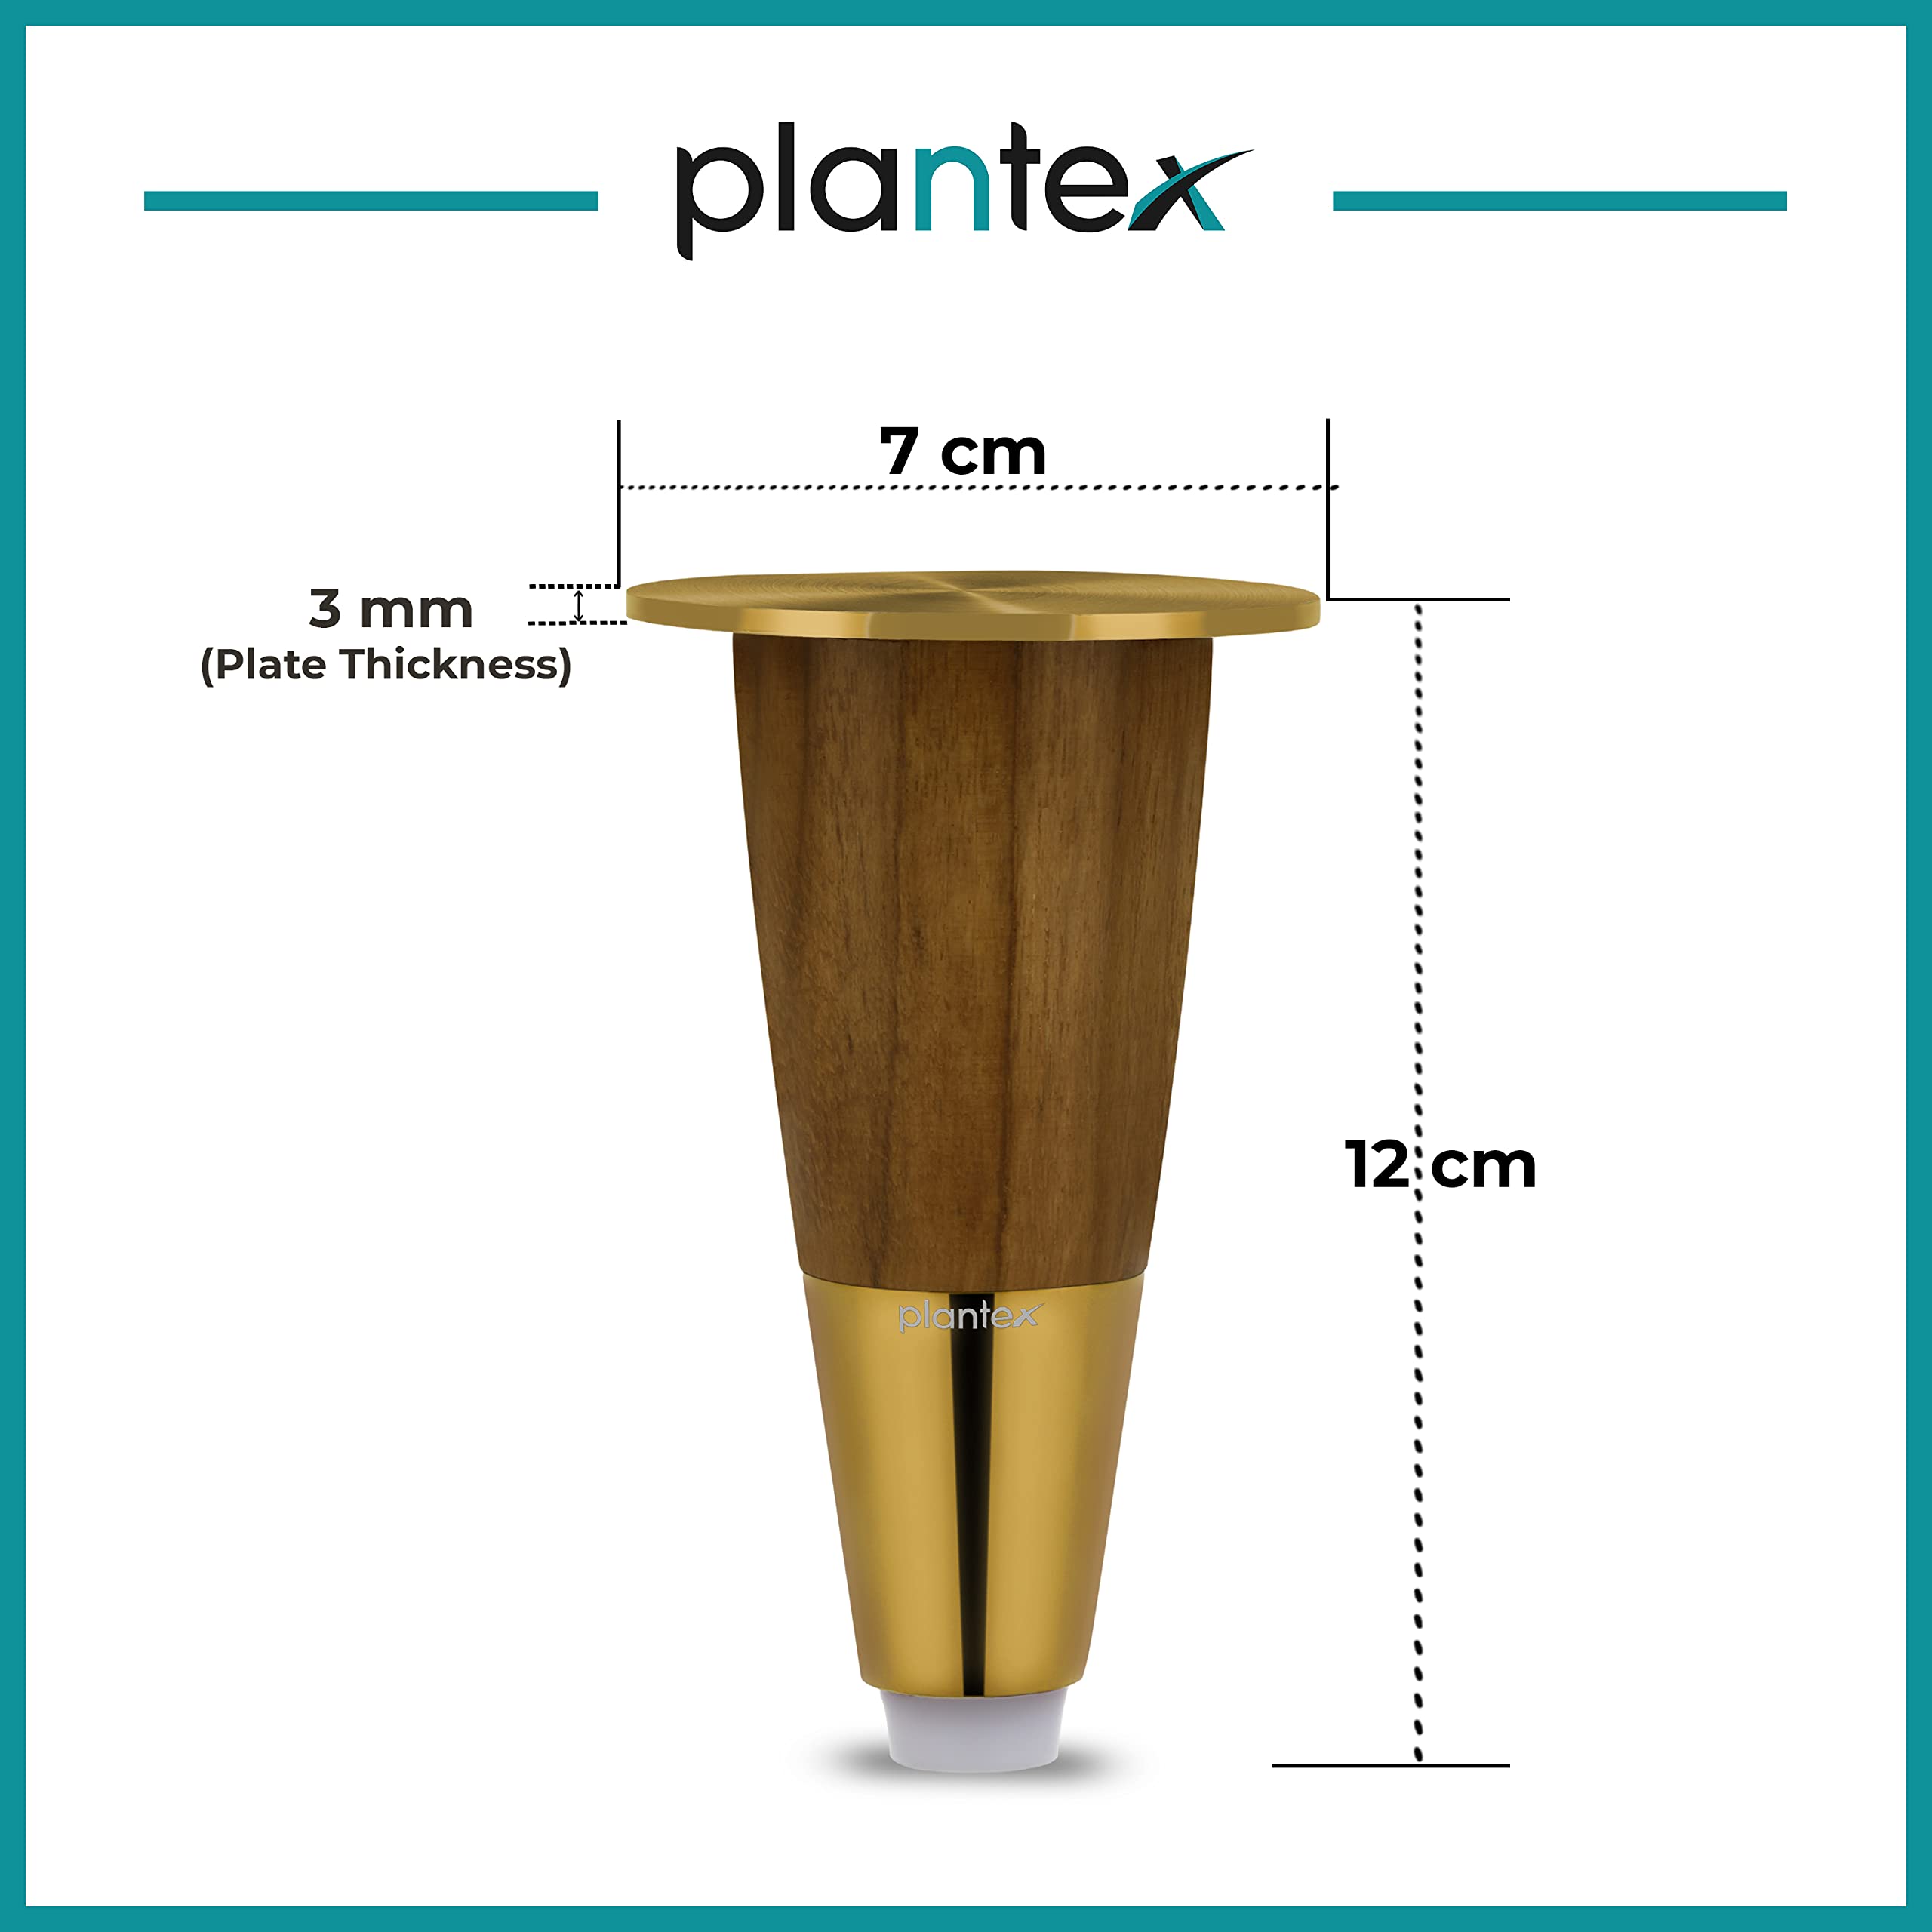 Plantex Stainless Steel and Wood 4 inch Sofa Leg/Bed Furniture Leg Pair for Home Furnitures (DTS-55-PVD Gold) – 10 Pcs